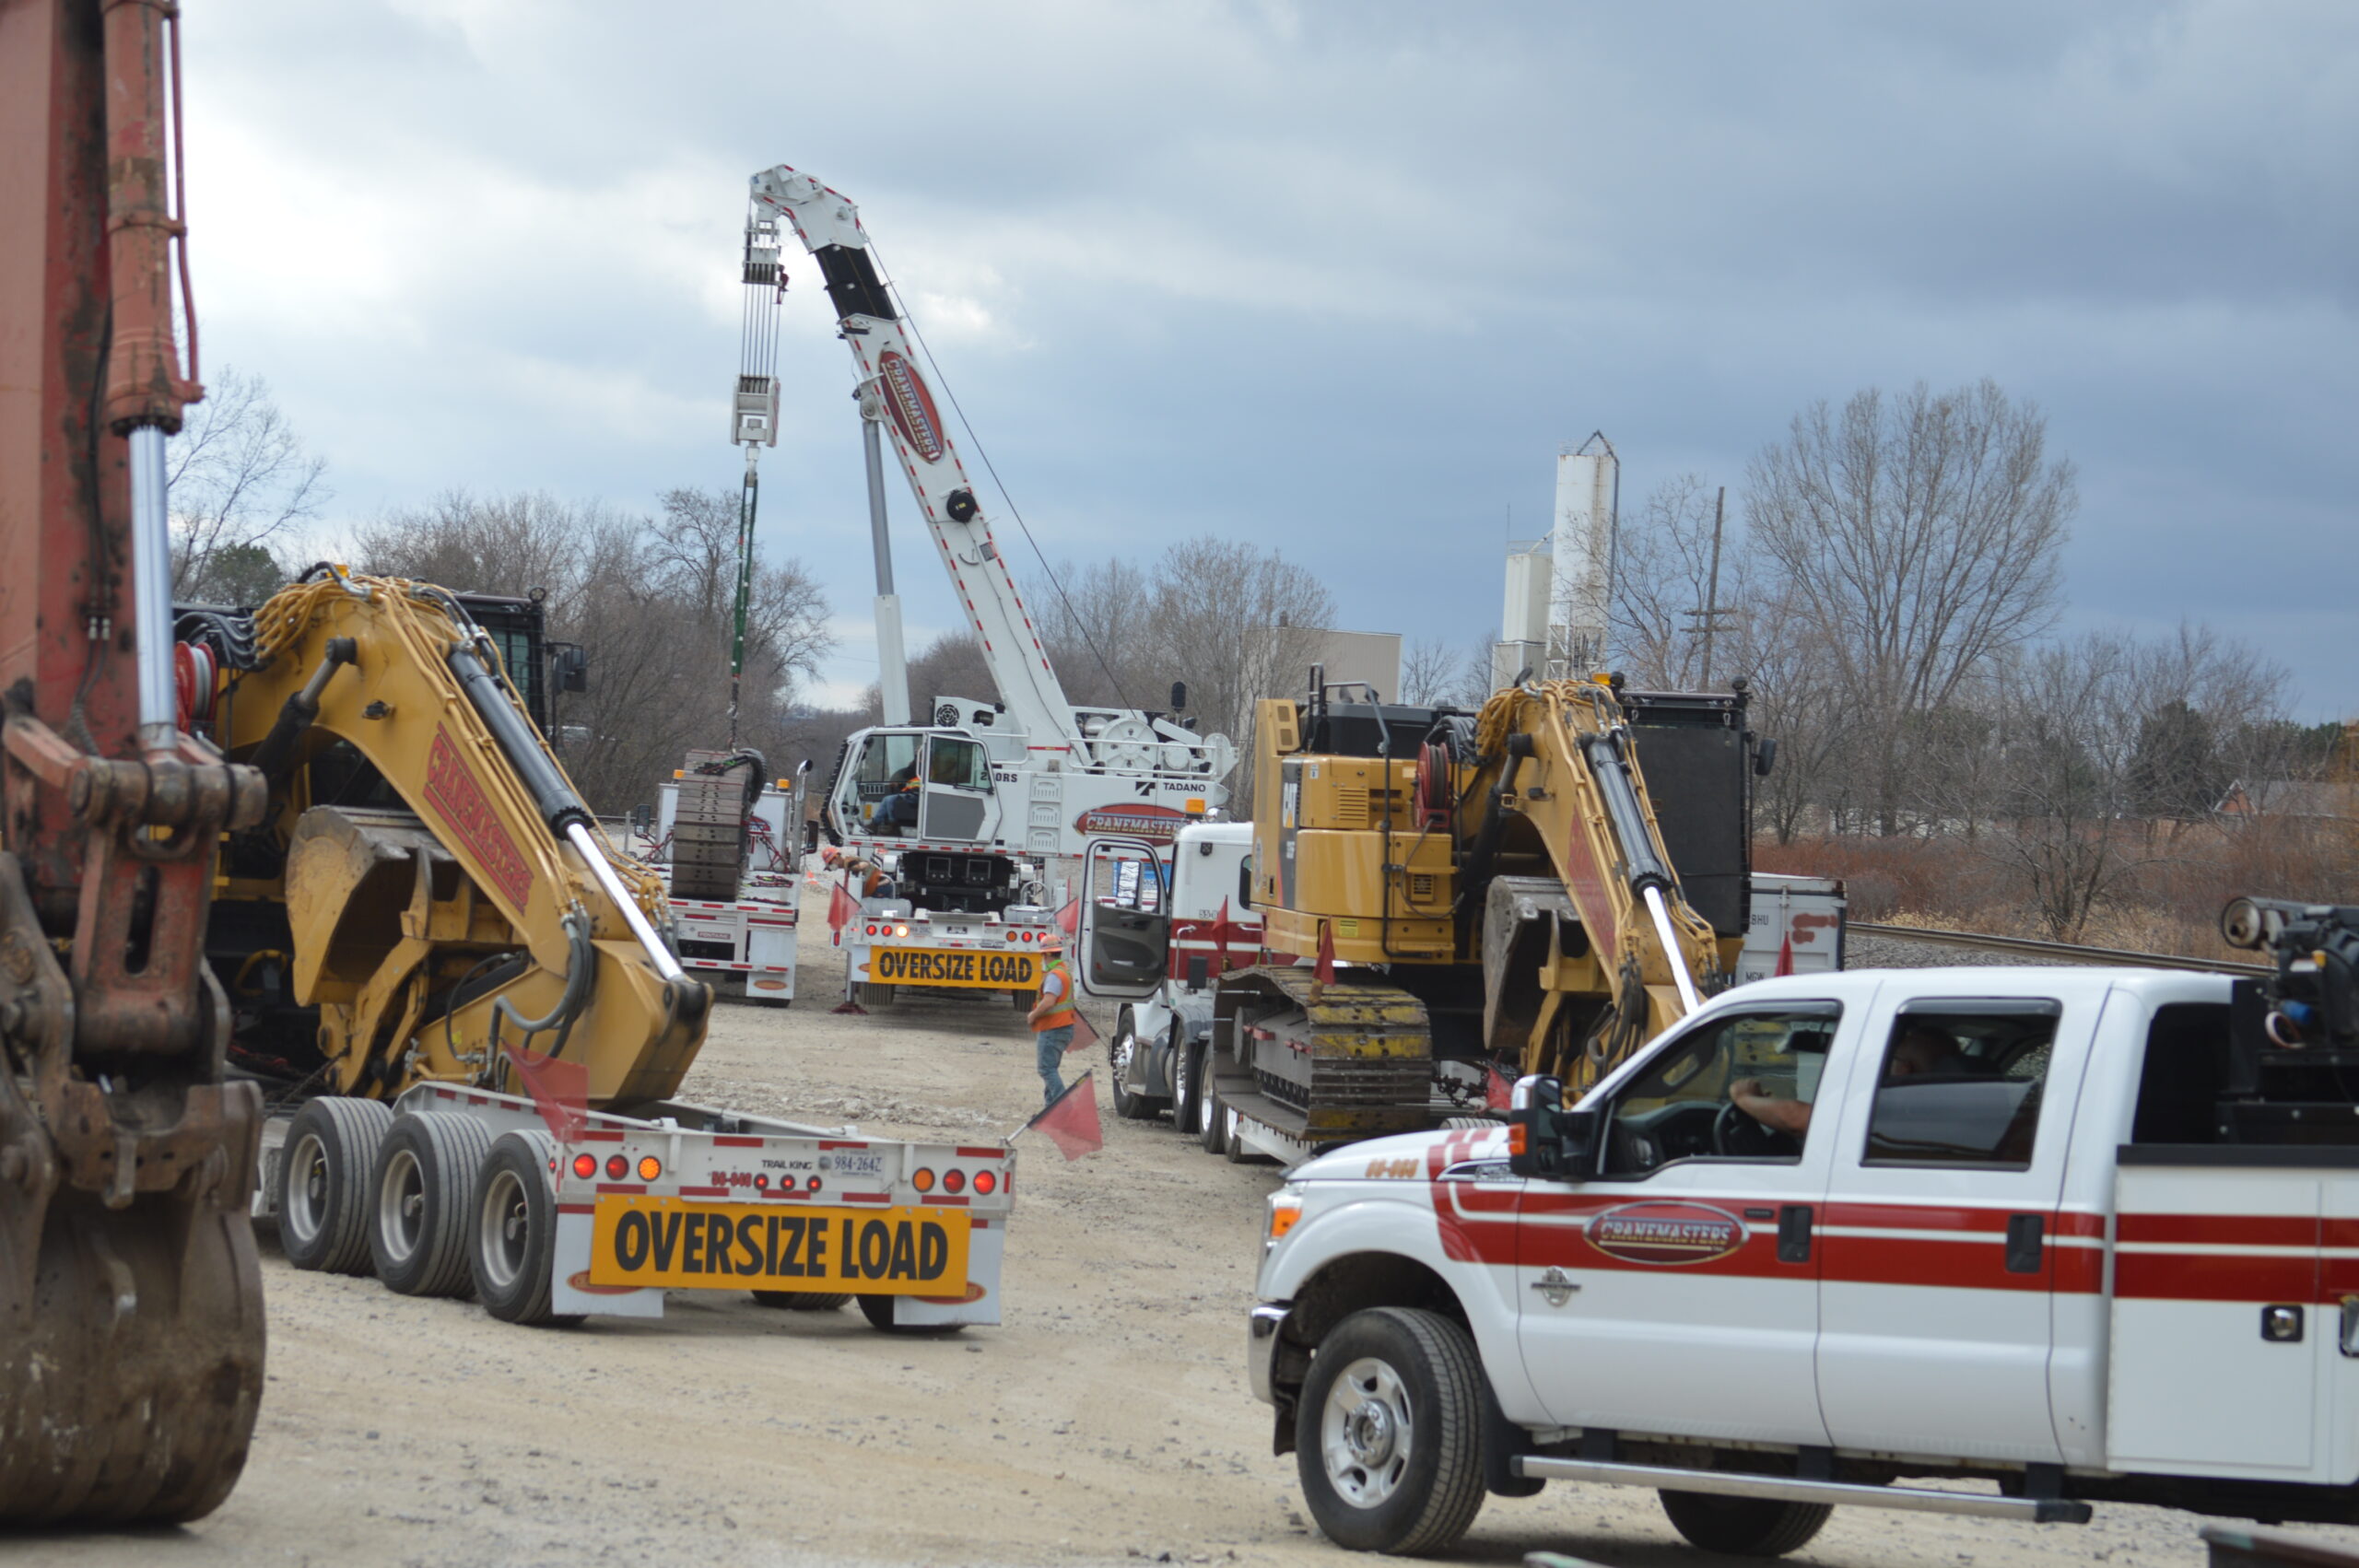 Pieces of construction equipment, including cranes and excavators, arrive on low-boy flatbed semi-trailers.